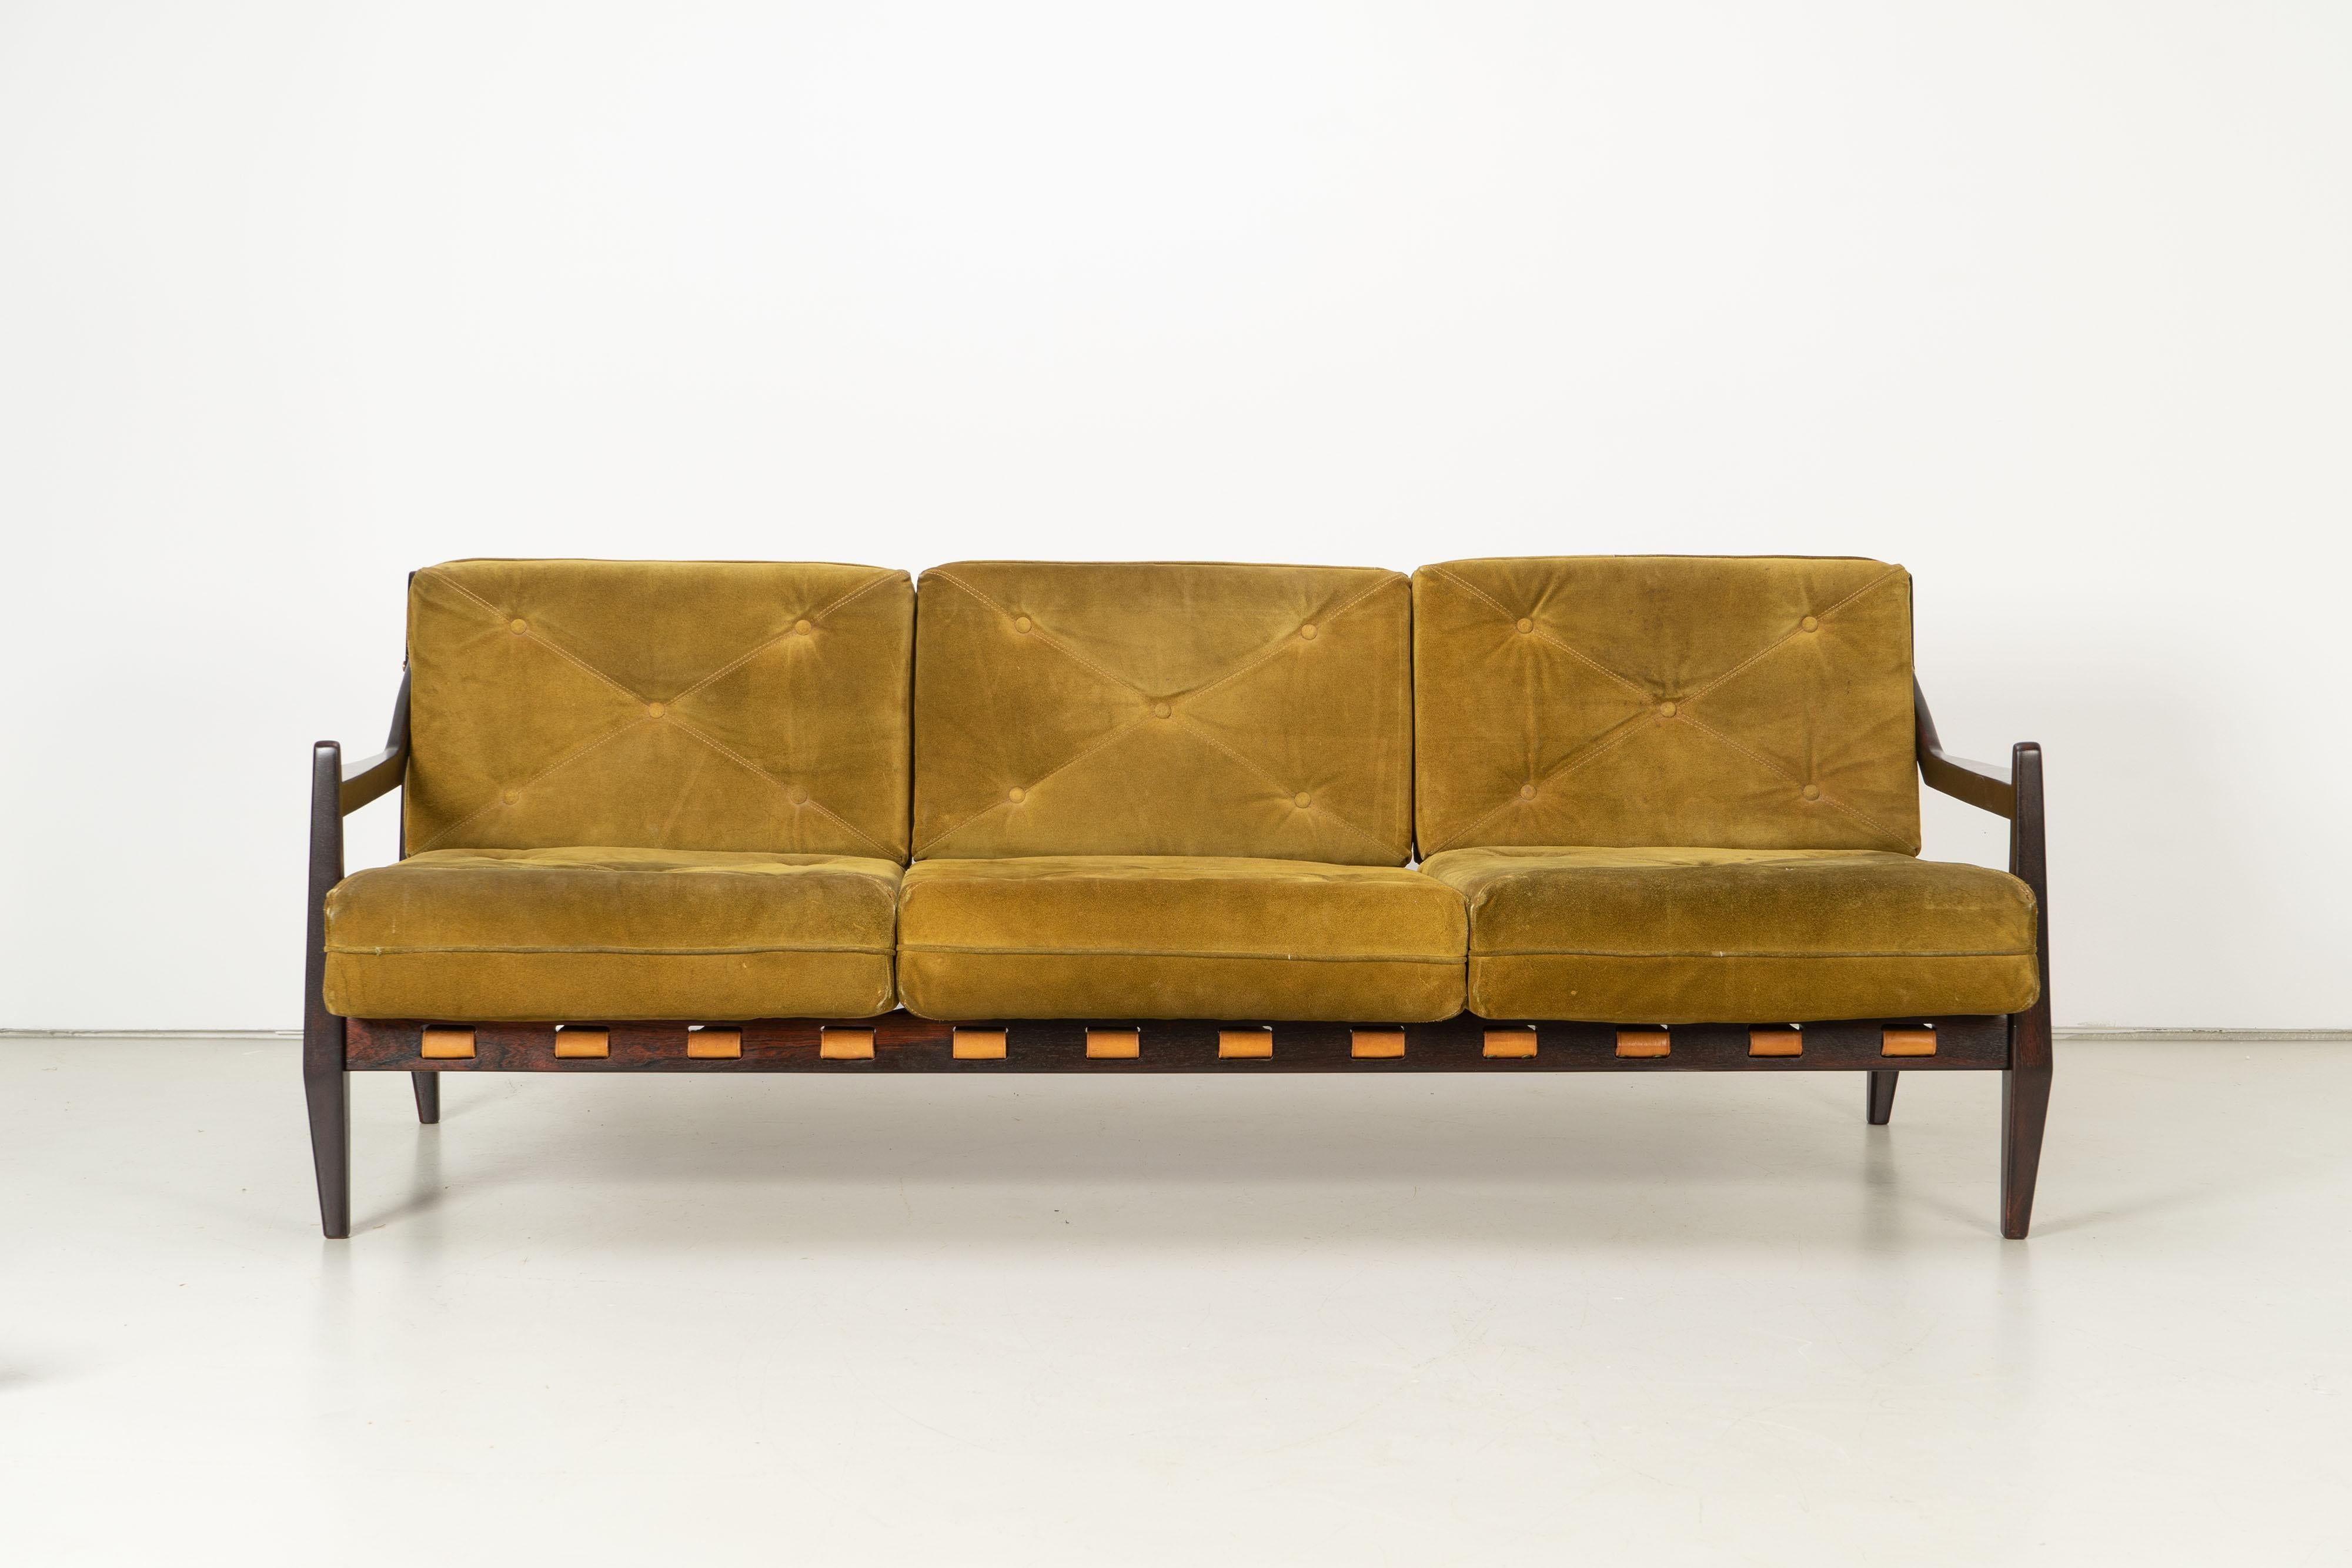 Rare Brazilian rosewood sofa by Jean Gillon from the 1960s. The sofa has been refinished but has original suede cushions. The buyer receives the CITES permit with the purchase (see pictures).